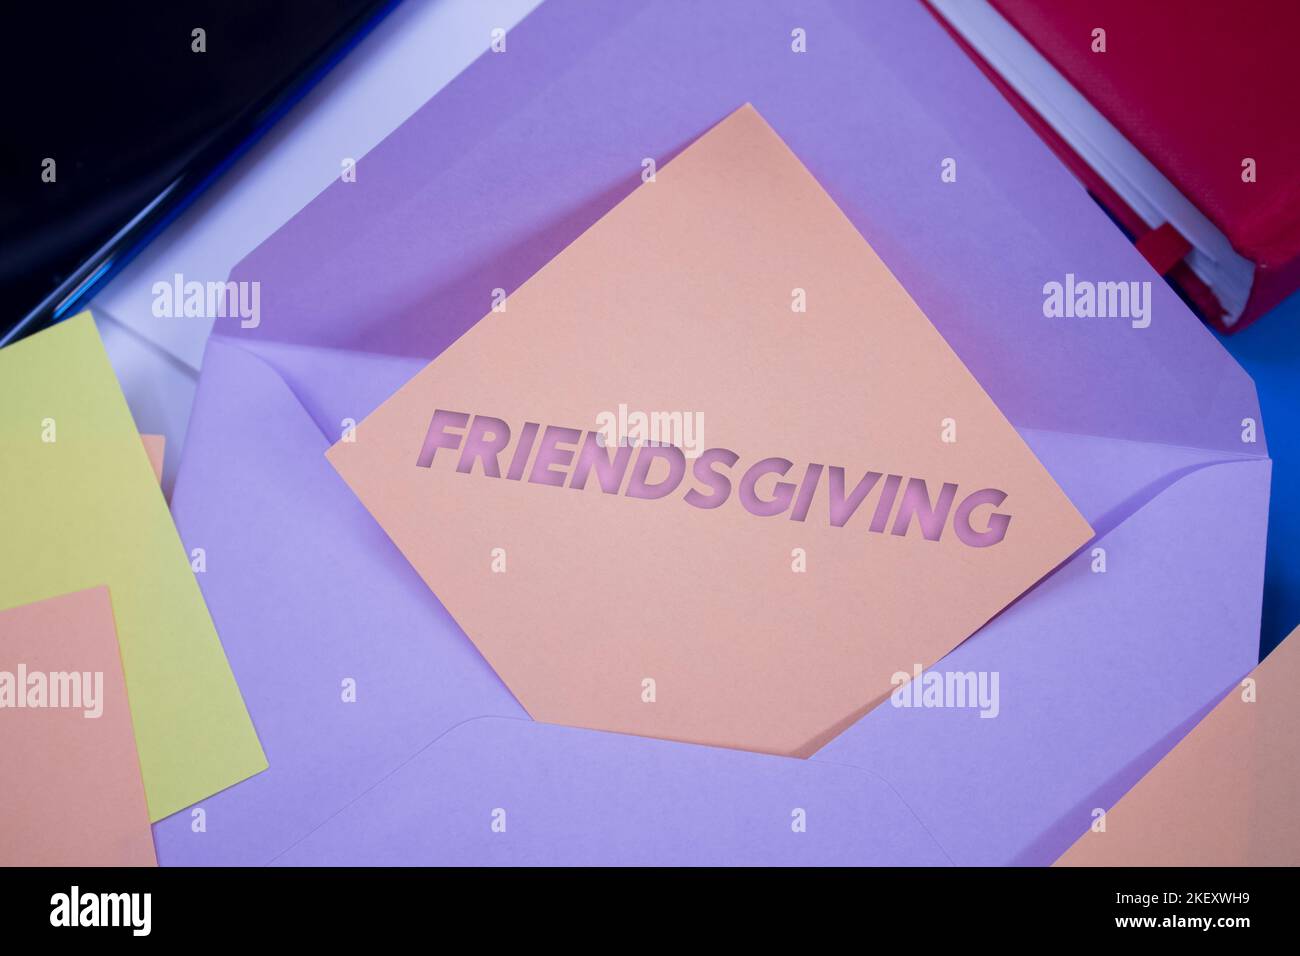 Friendsgiving. Text on adhesive note paper. Event, celebration reminder message. Stock Photo